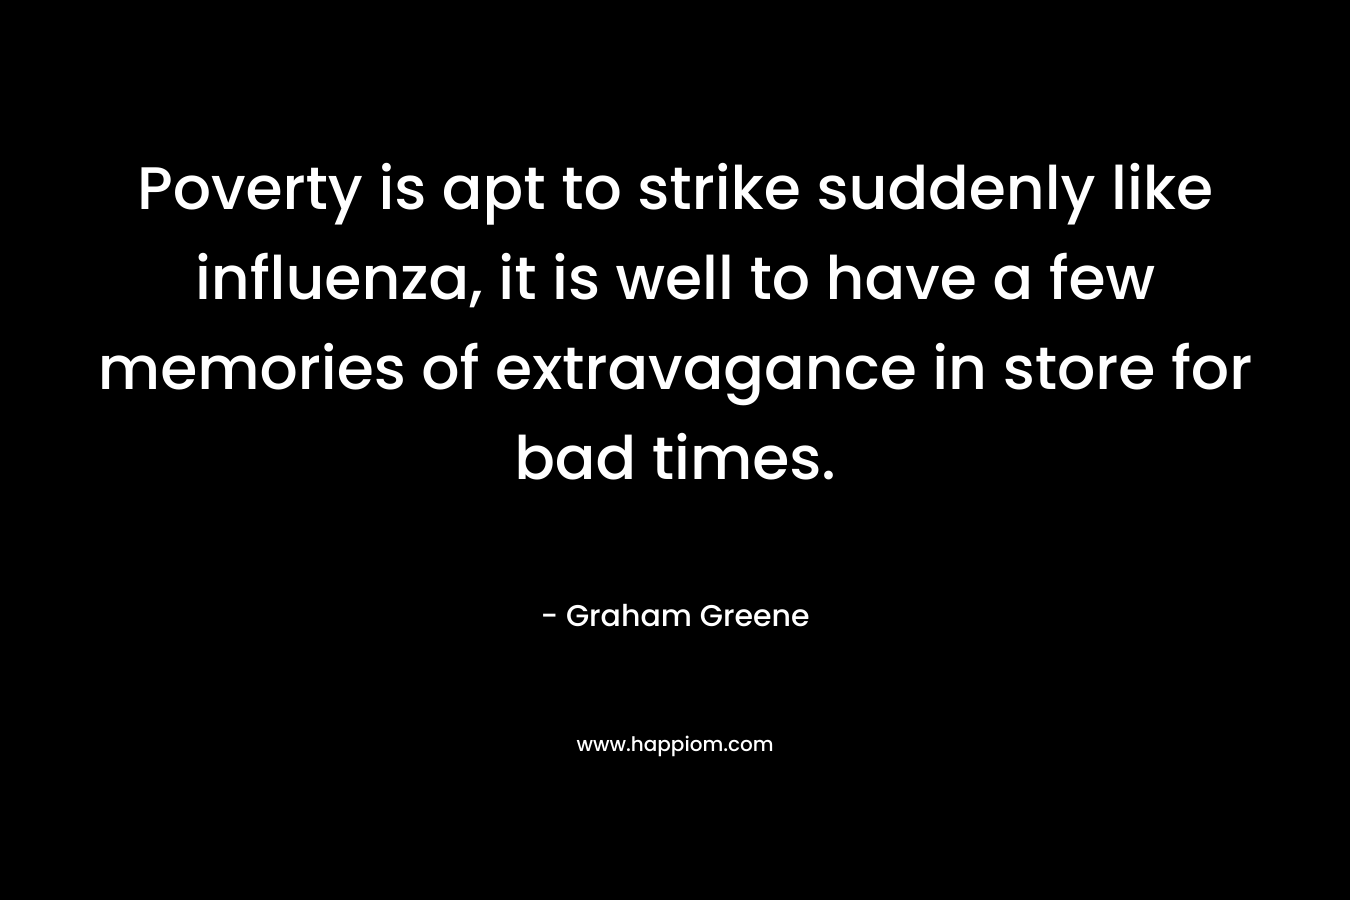 Poverty is apt to strike suddenly like influenza, it is well to have a few memories of extravagance in store for bad times. – Graham Greene